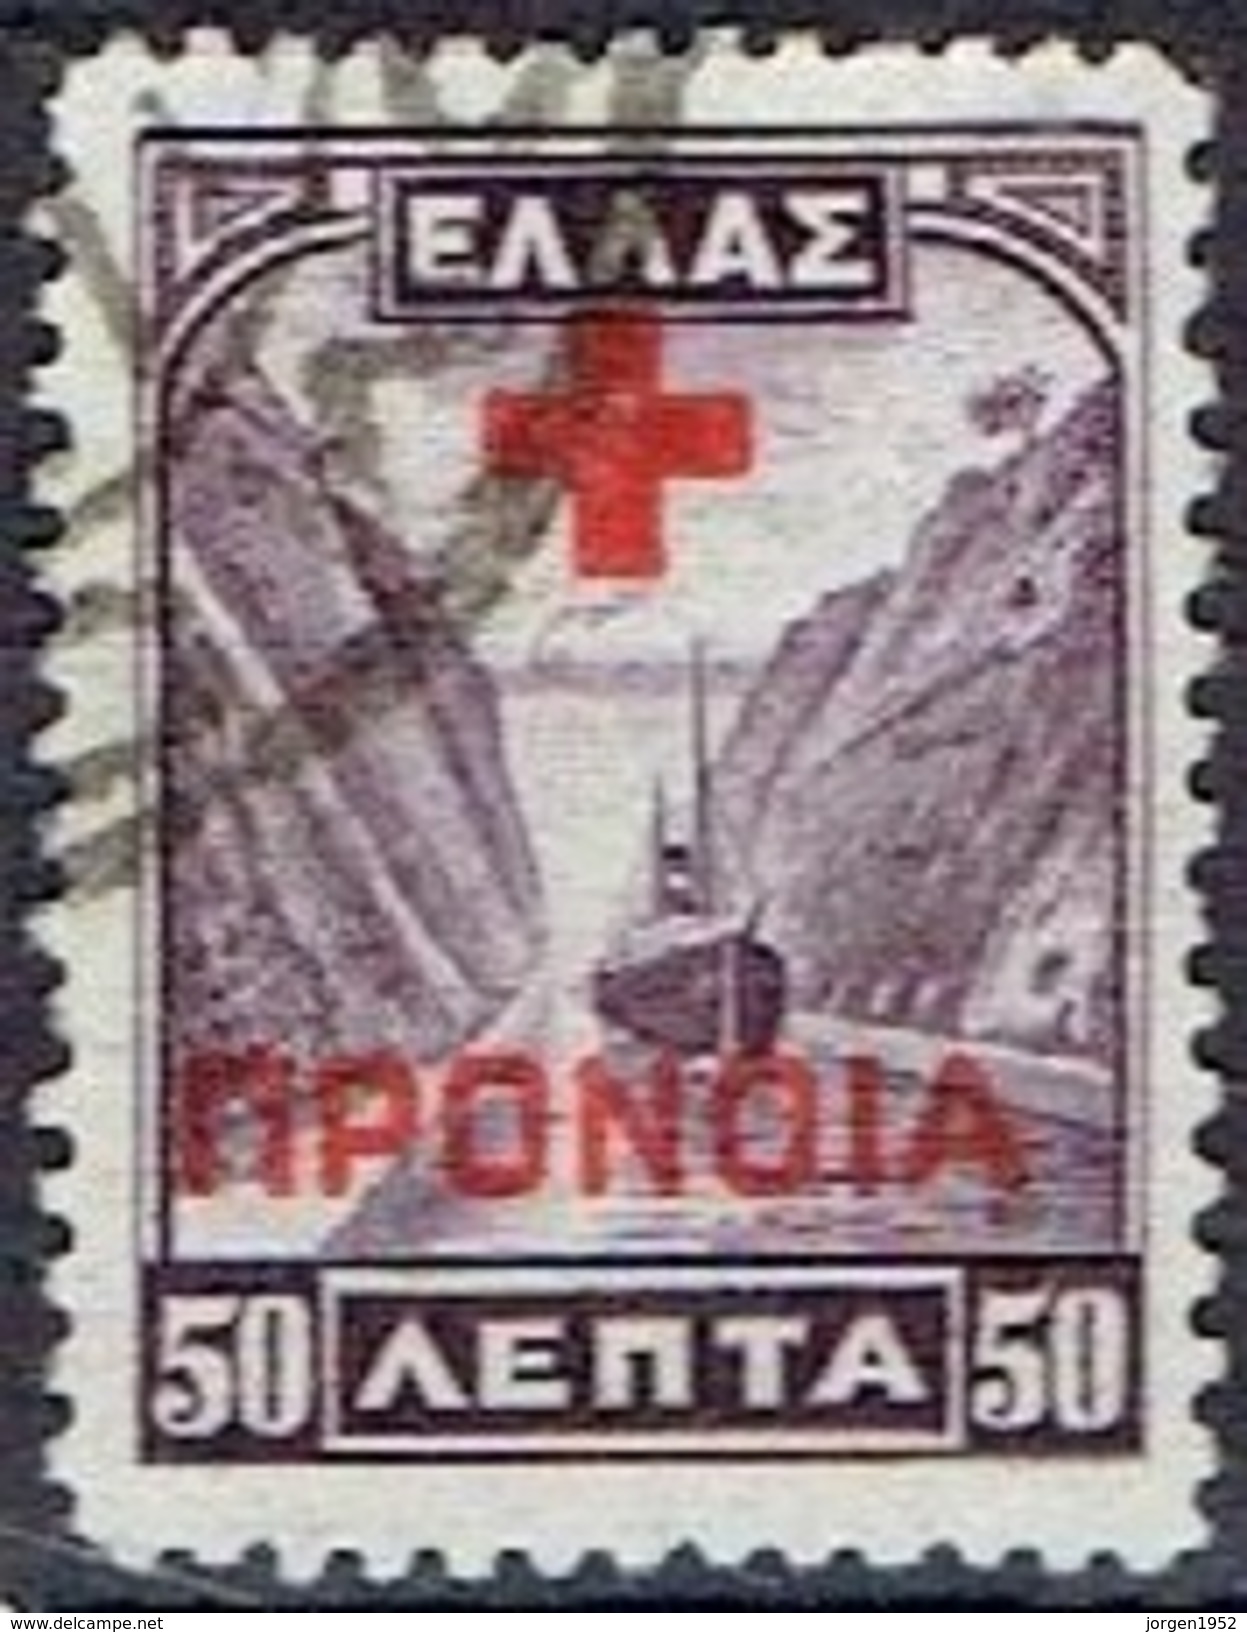 GREECE # SOCIAL WELFARE STAMPS FROM 1938 - Résistance Nationale